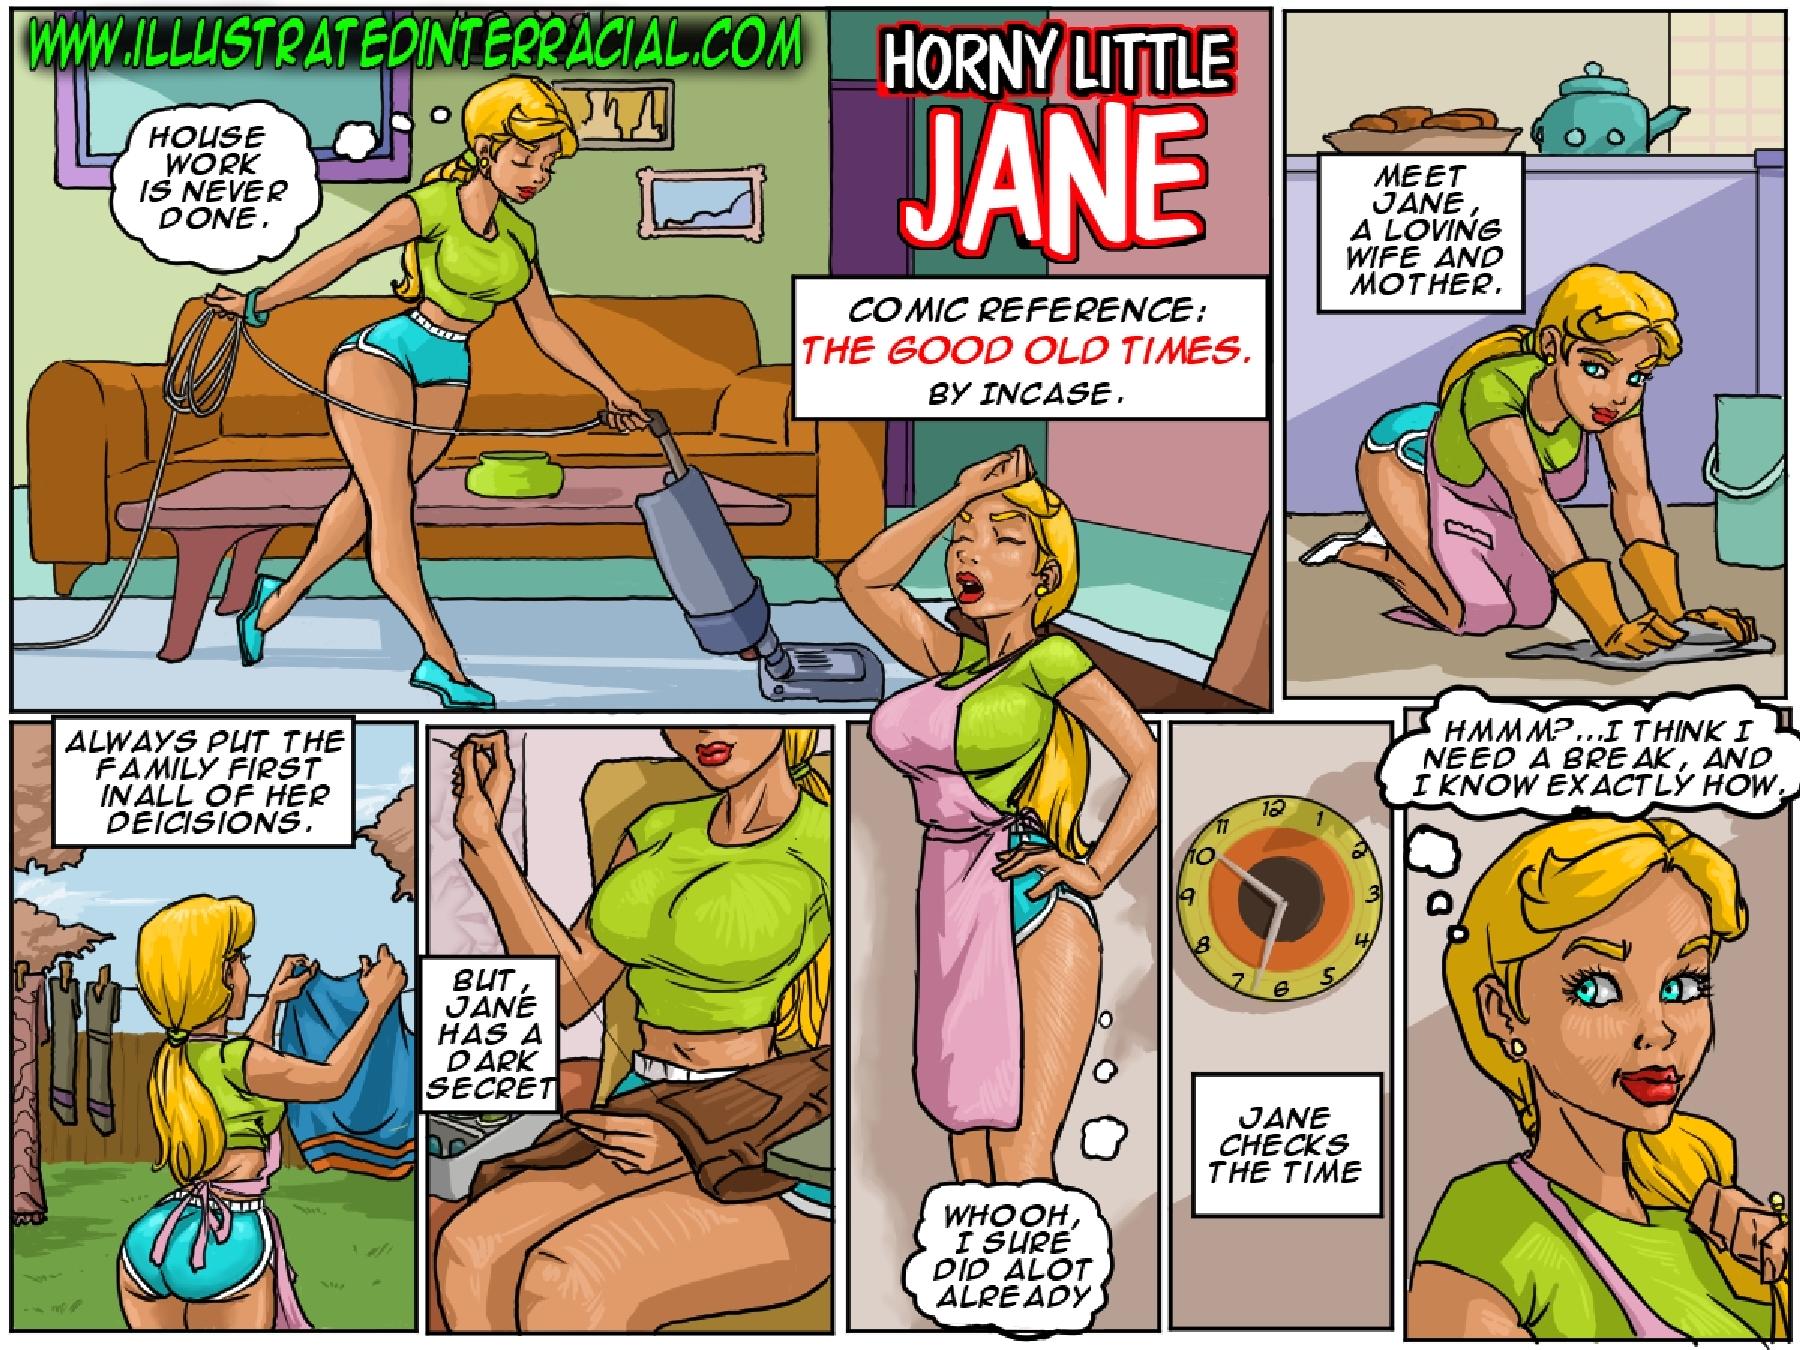 Illustrated interracial - Horny Little Jane